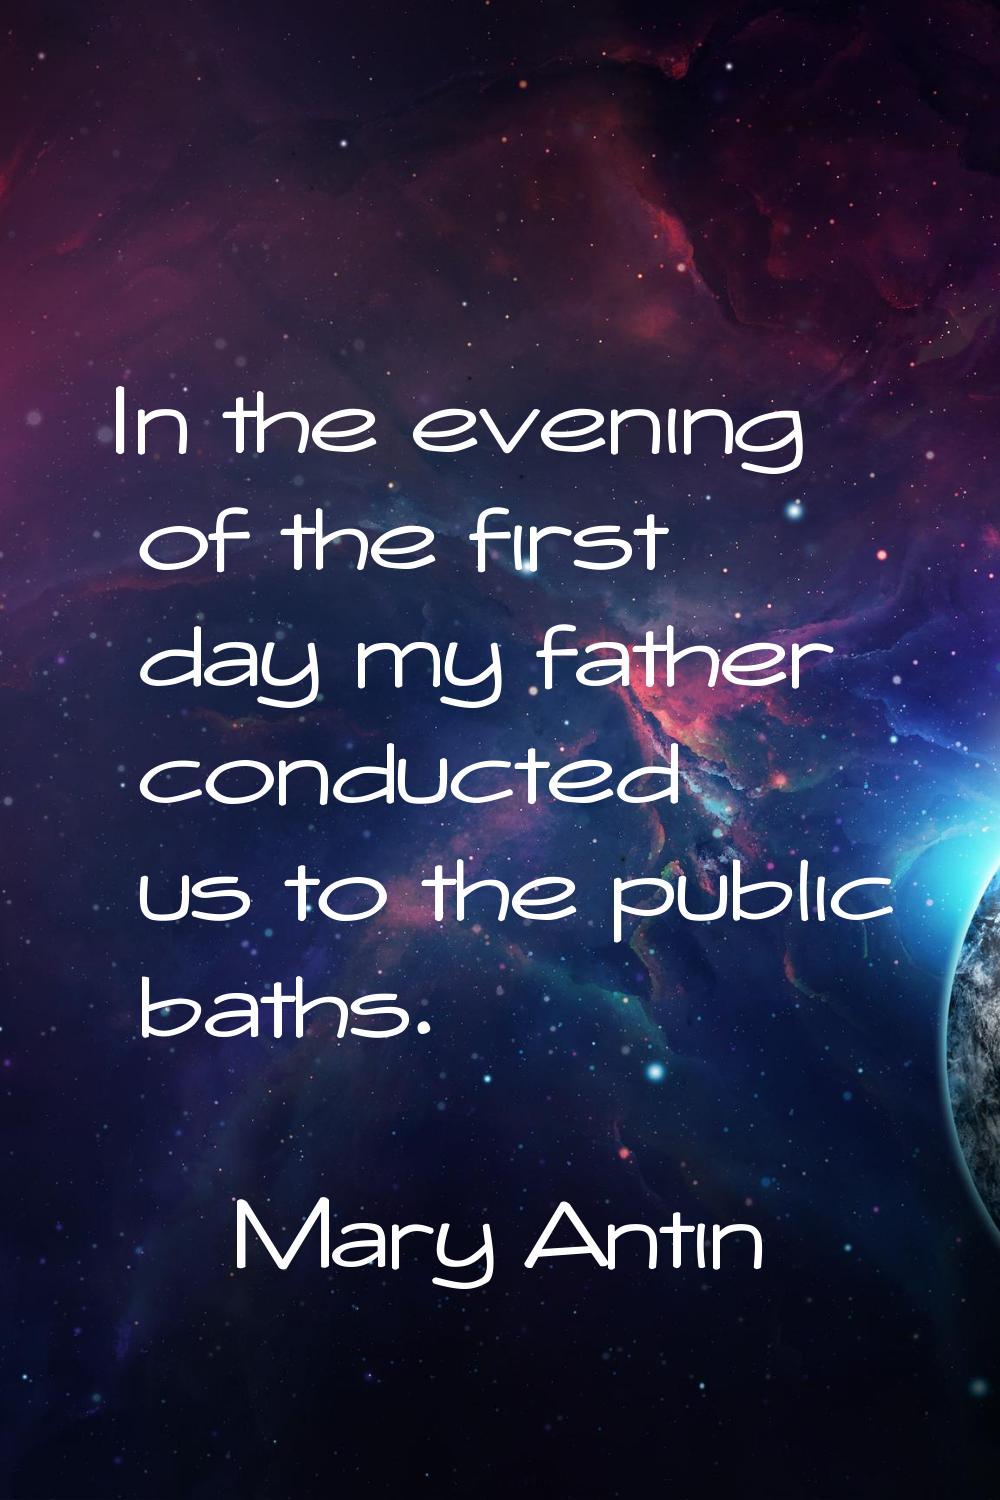 In the evening of the first day my father conducted us to the public baths.